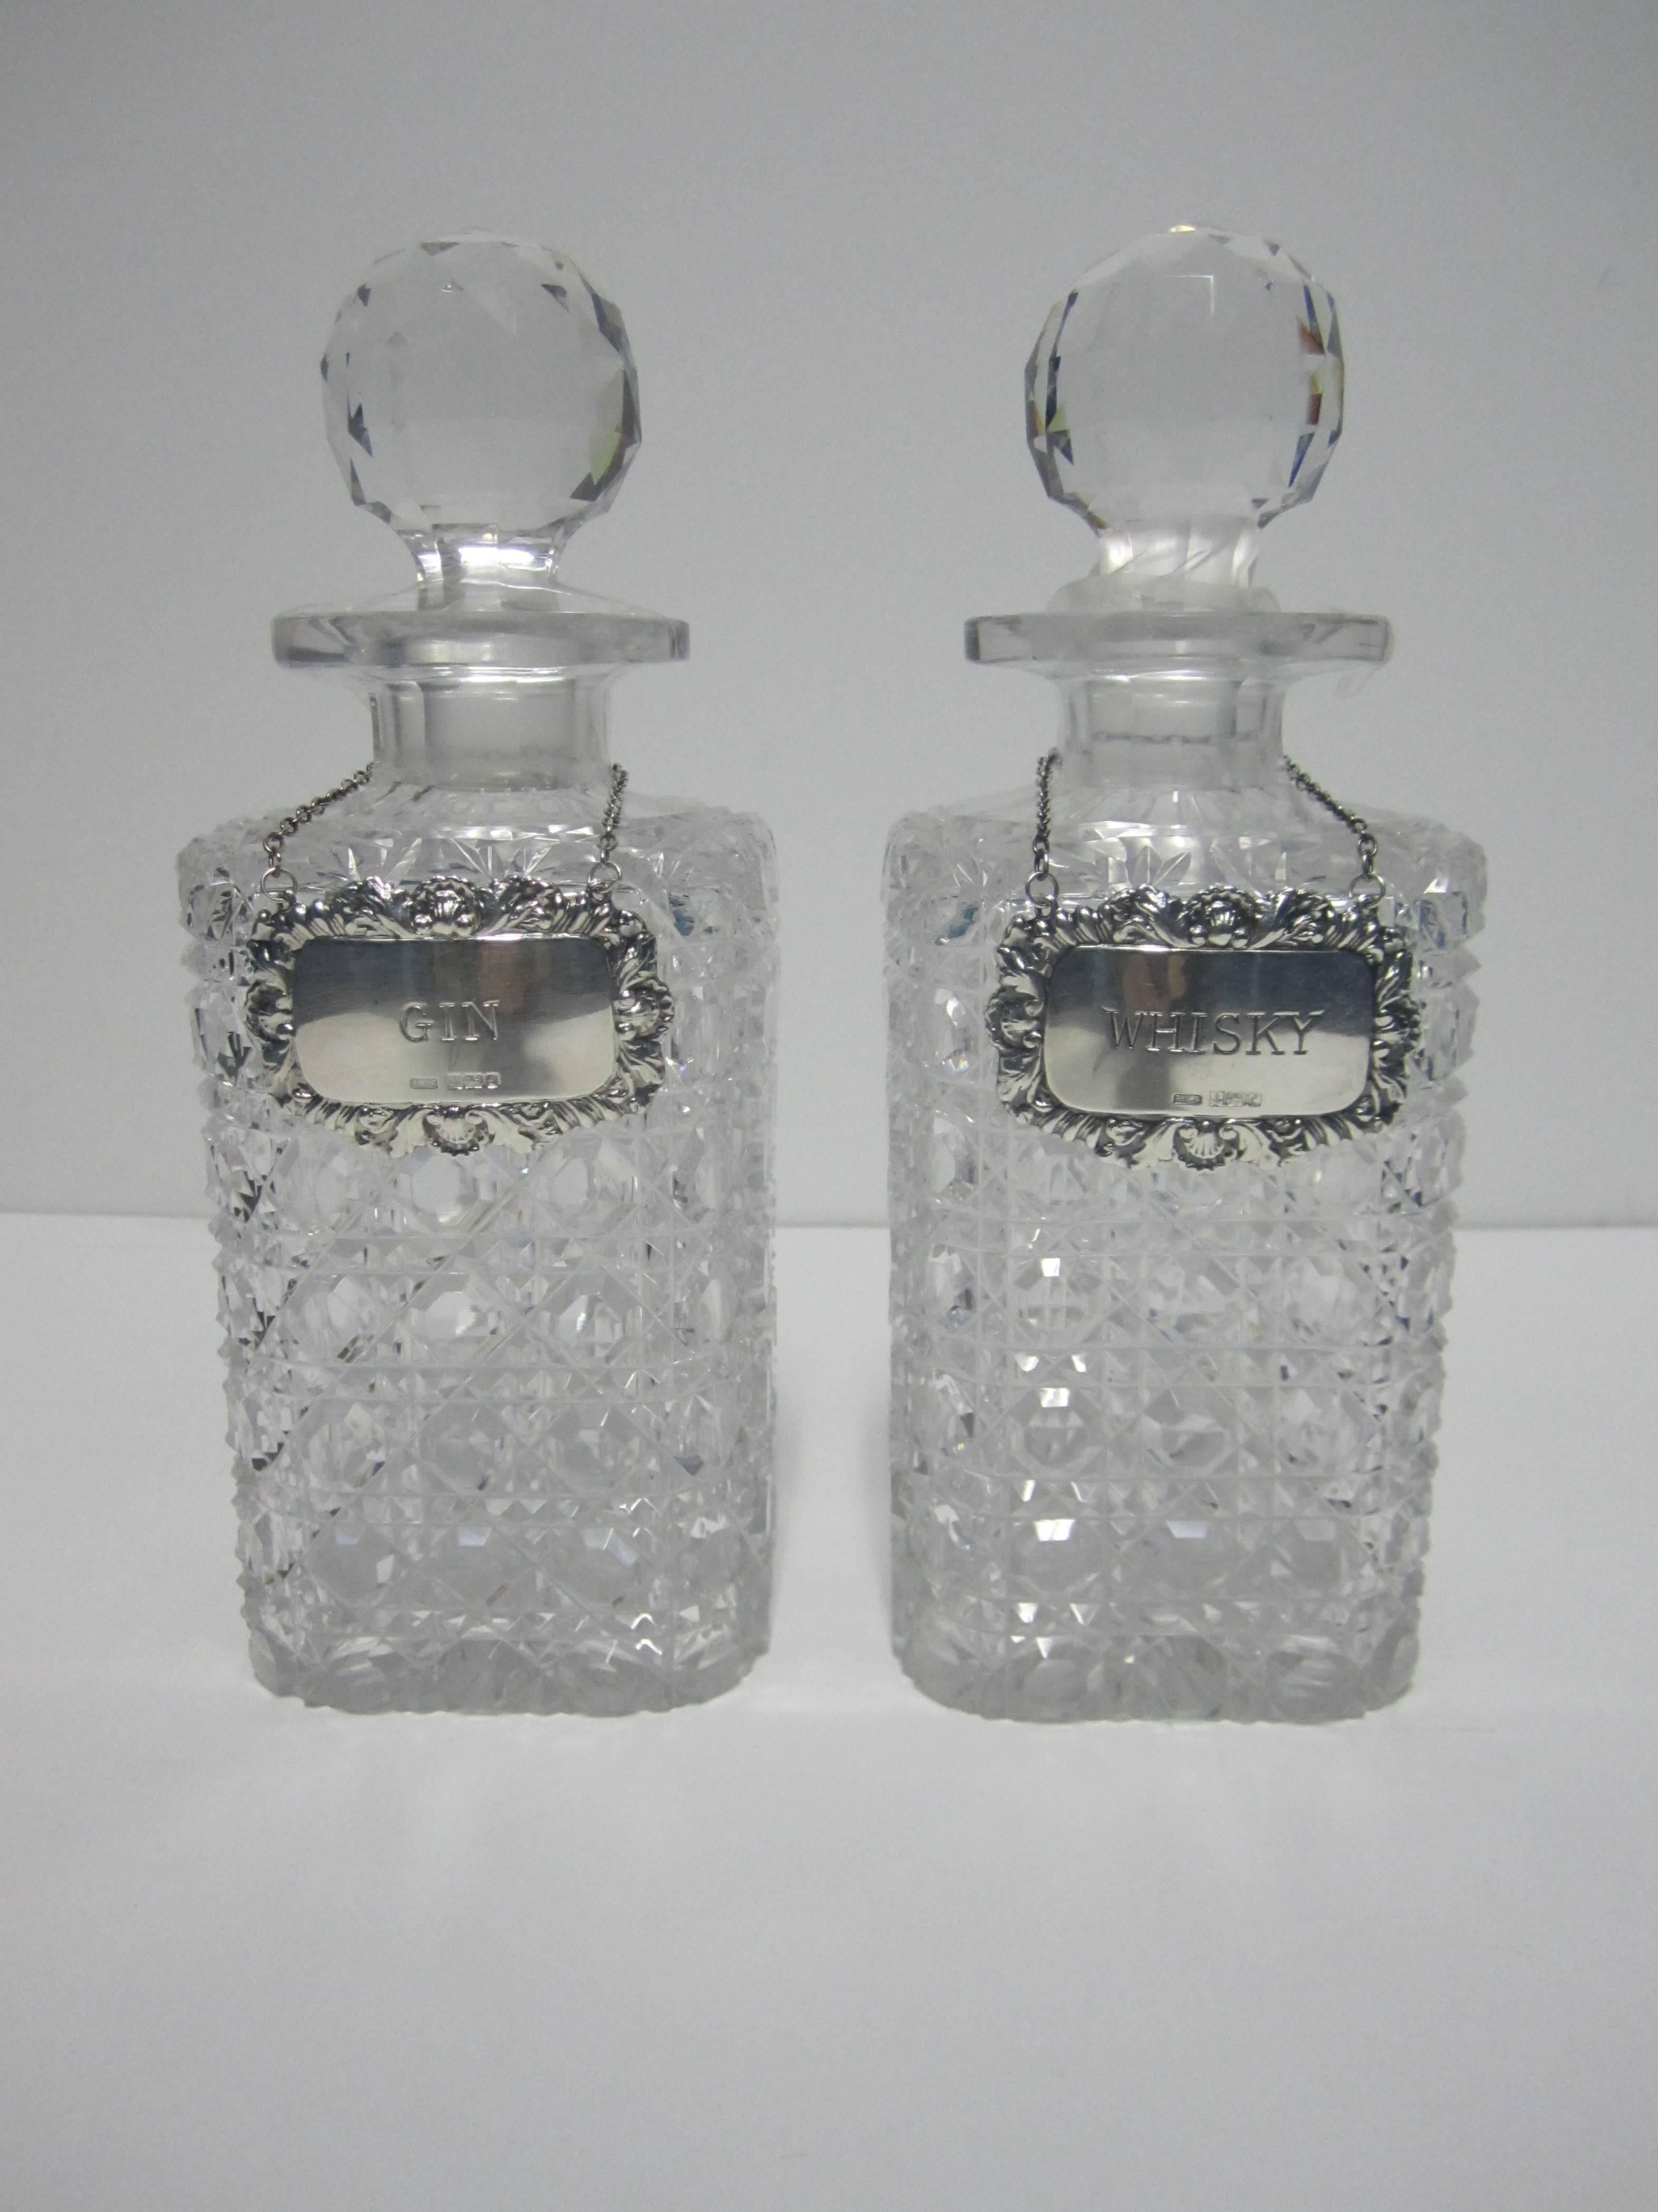 An antique pair of 'brilliant cut' crystal decanters, circa 20th Century, with English sterling silver 'GIN' and 'WHISKEY' bottle 'labels' or decanter 'tickets'. Sterling silver 'labels' are marked. Pair available here online. By request, pair can